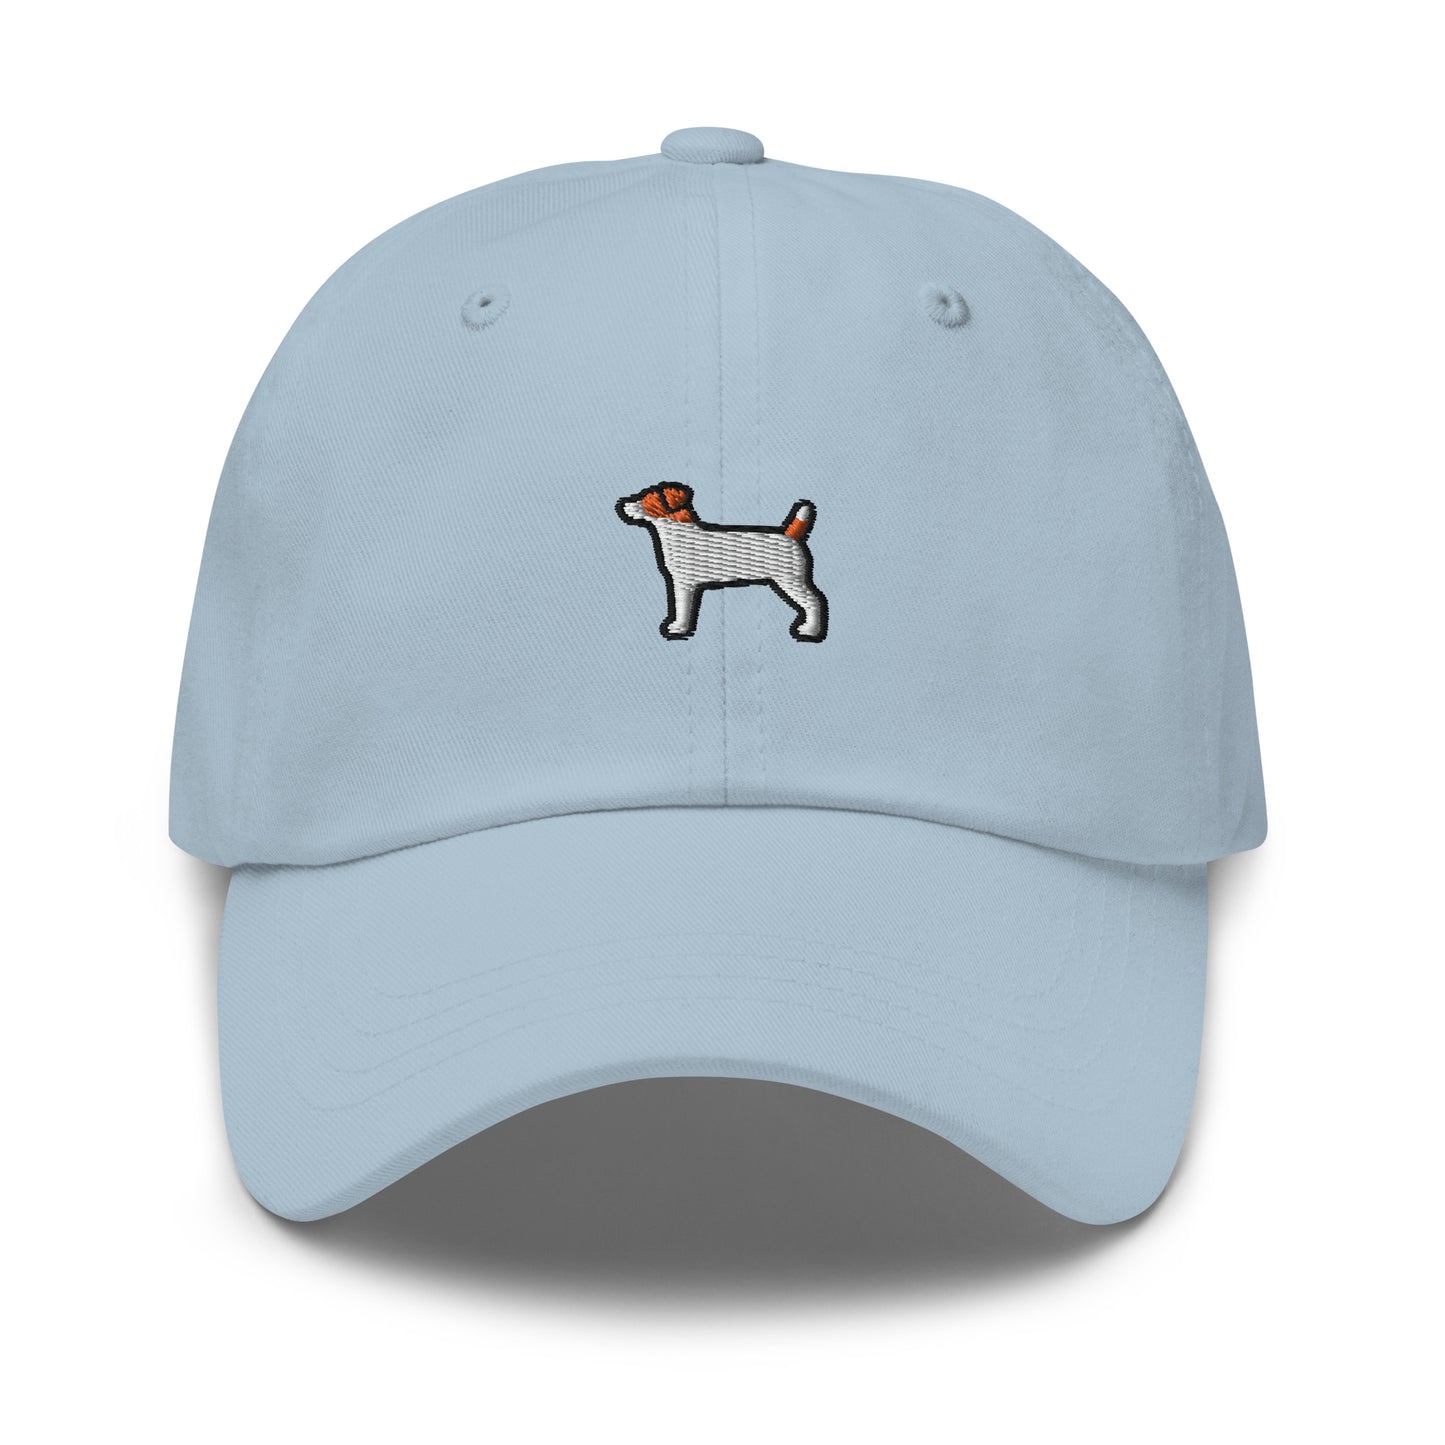 Jack Russell Terrier Dog Embroidered Baseball Cap